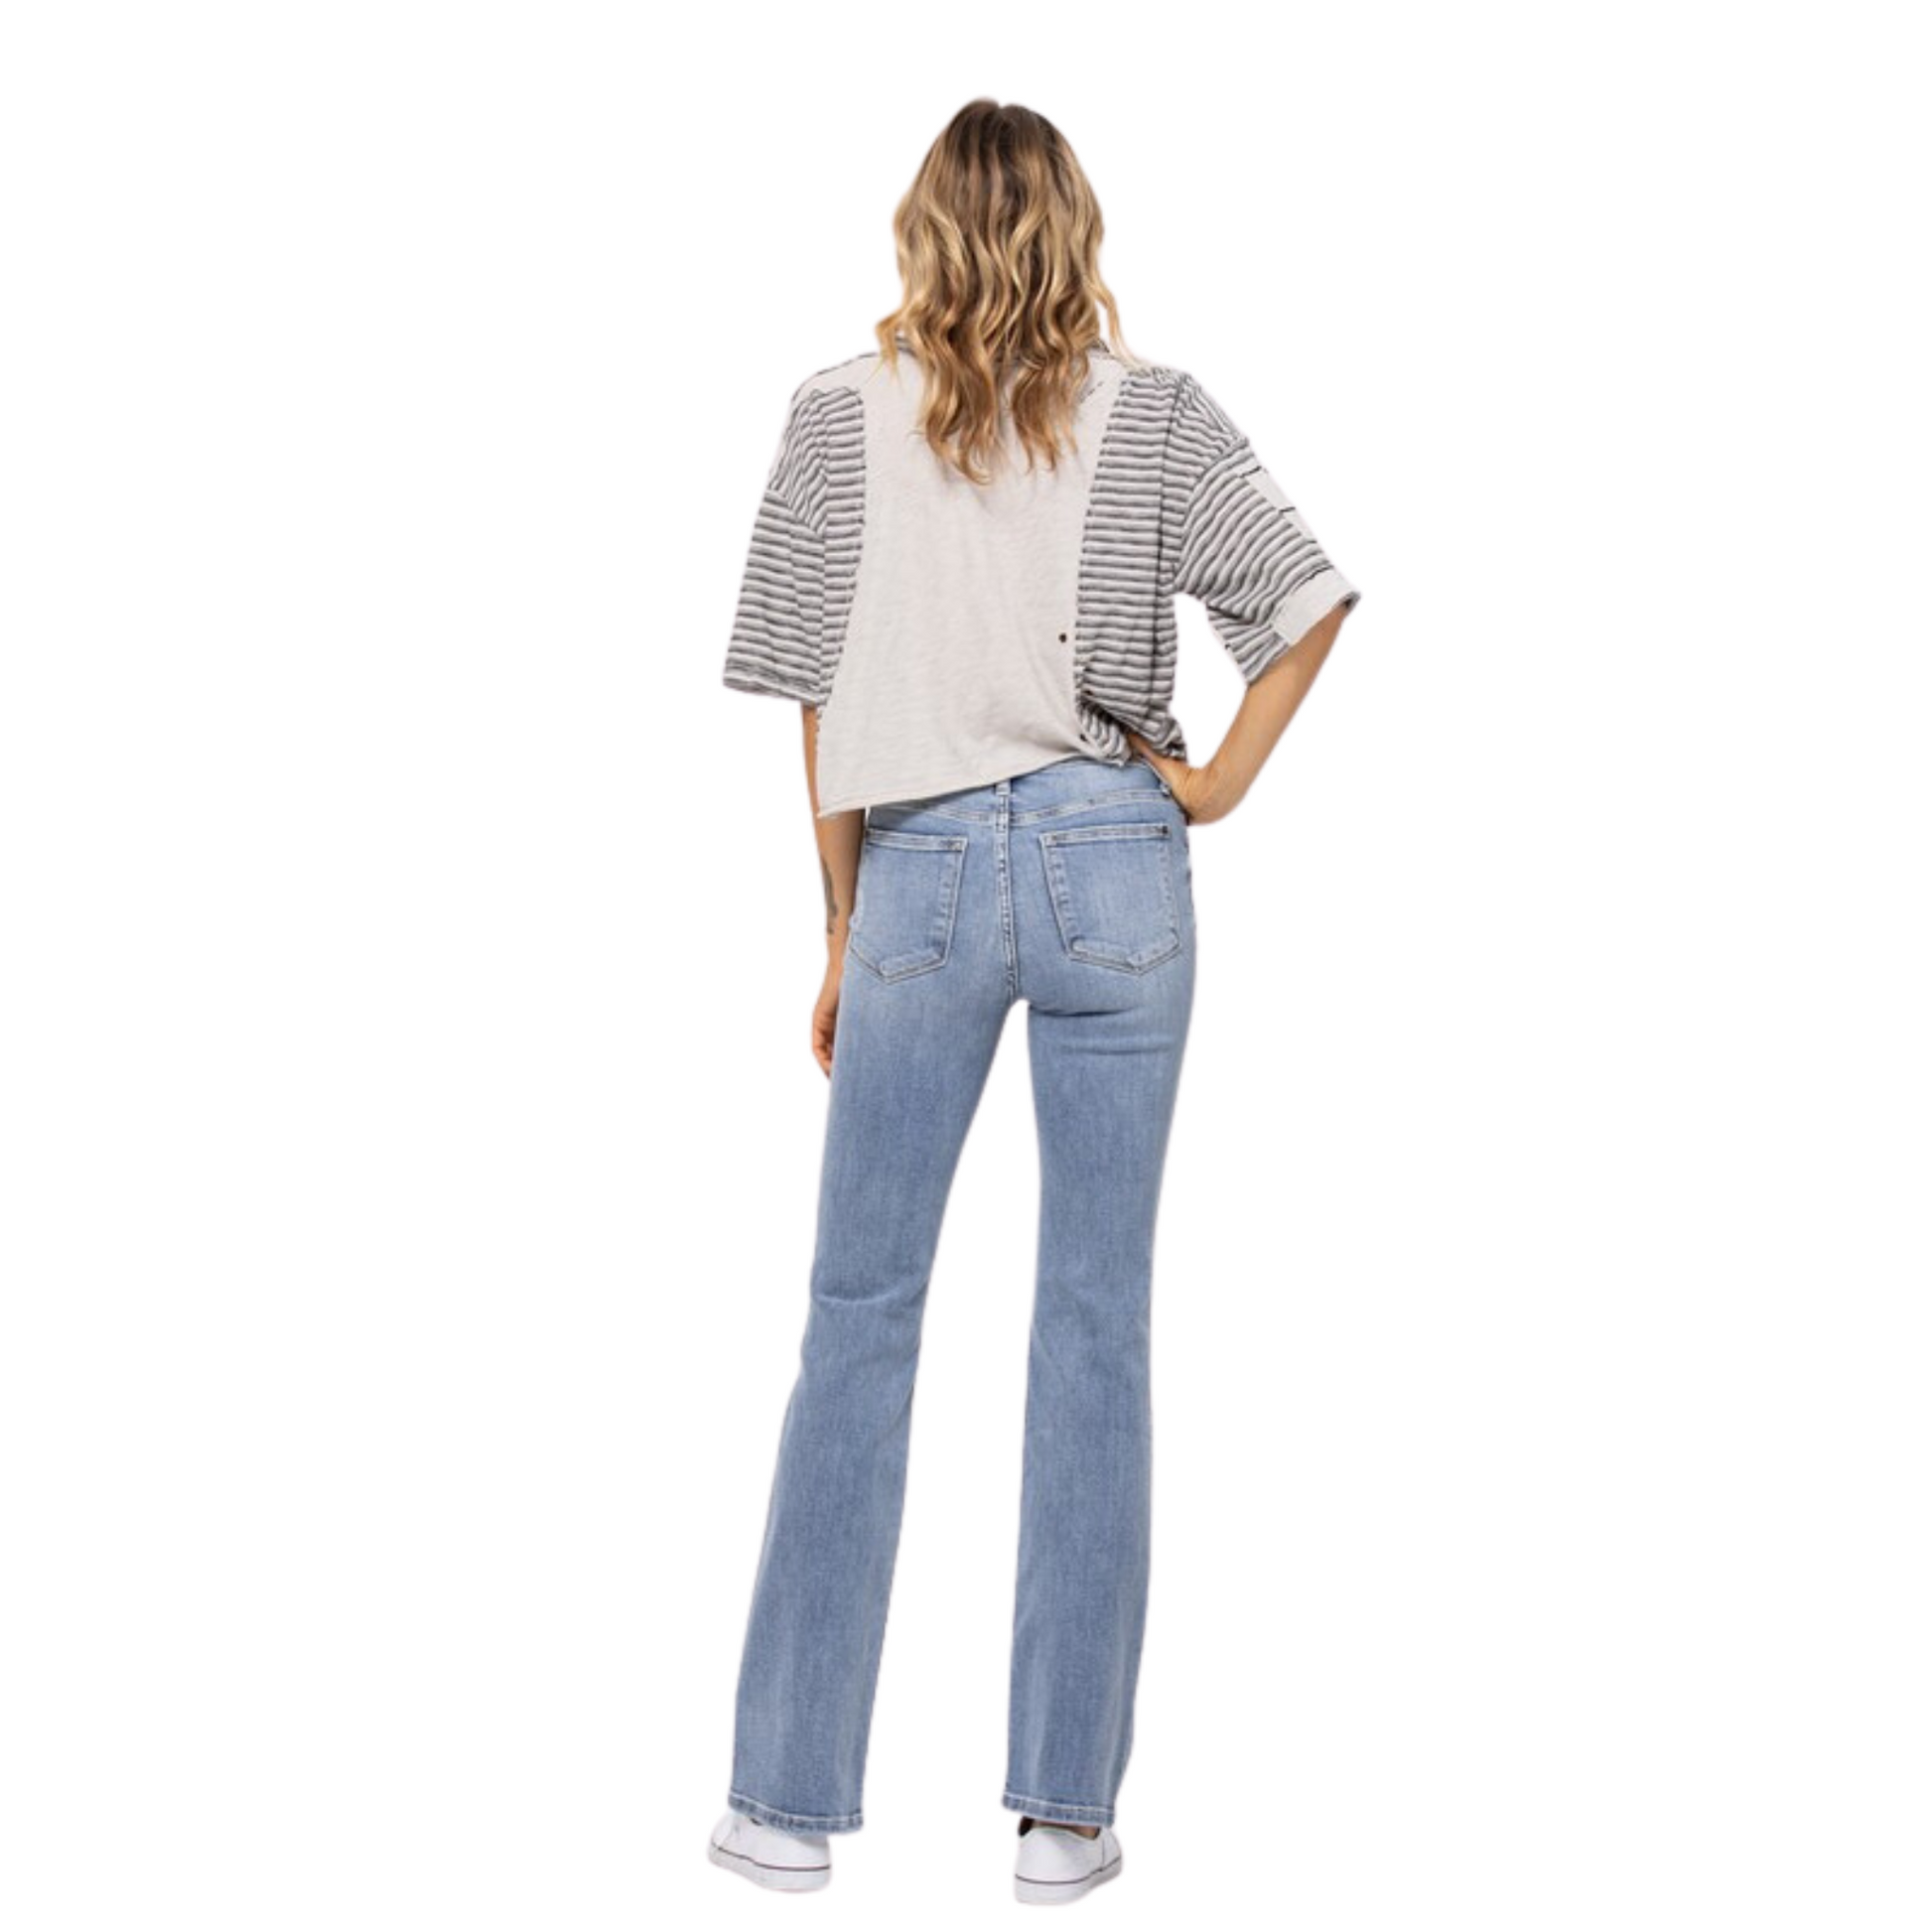 These plus size Judy Blue jeans are perfect for any casual occasion. Light wash denim ensures comfort and versatility, while the classic boot cut fit flatters all body types. Achieve your desired look with ease.